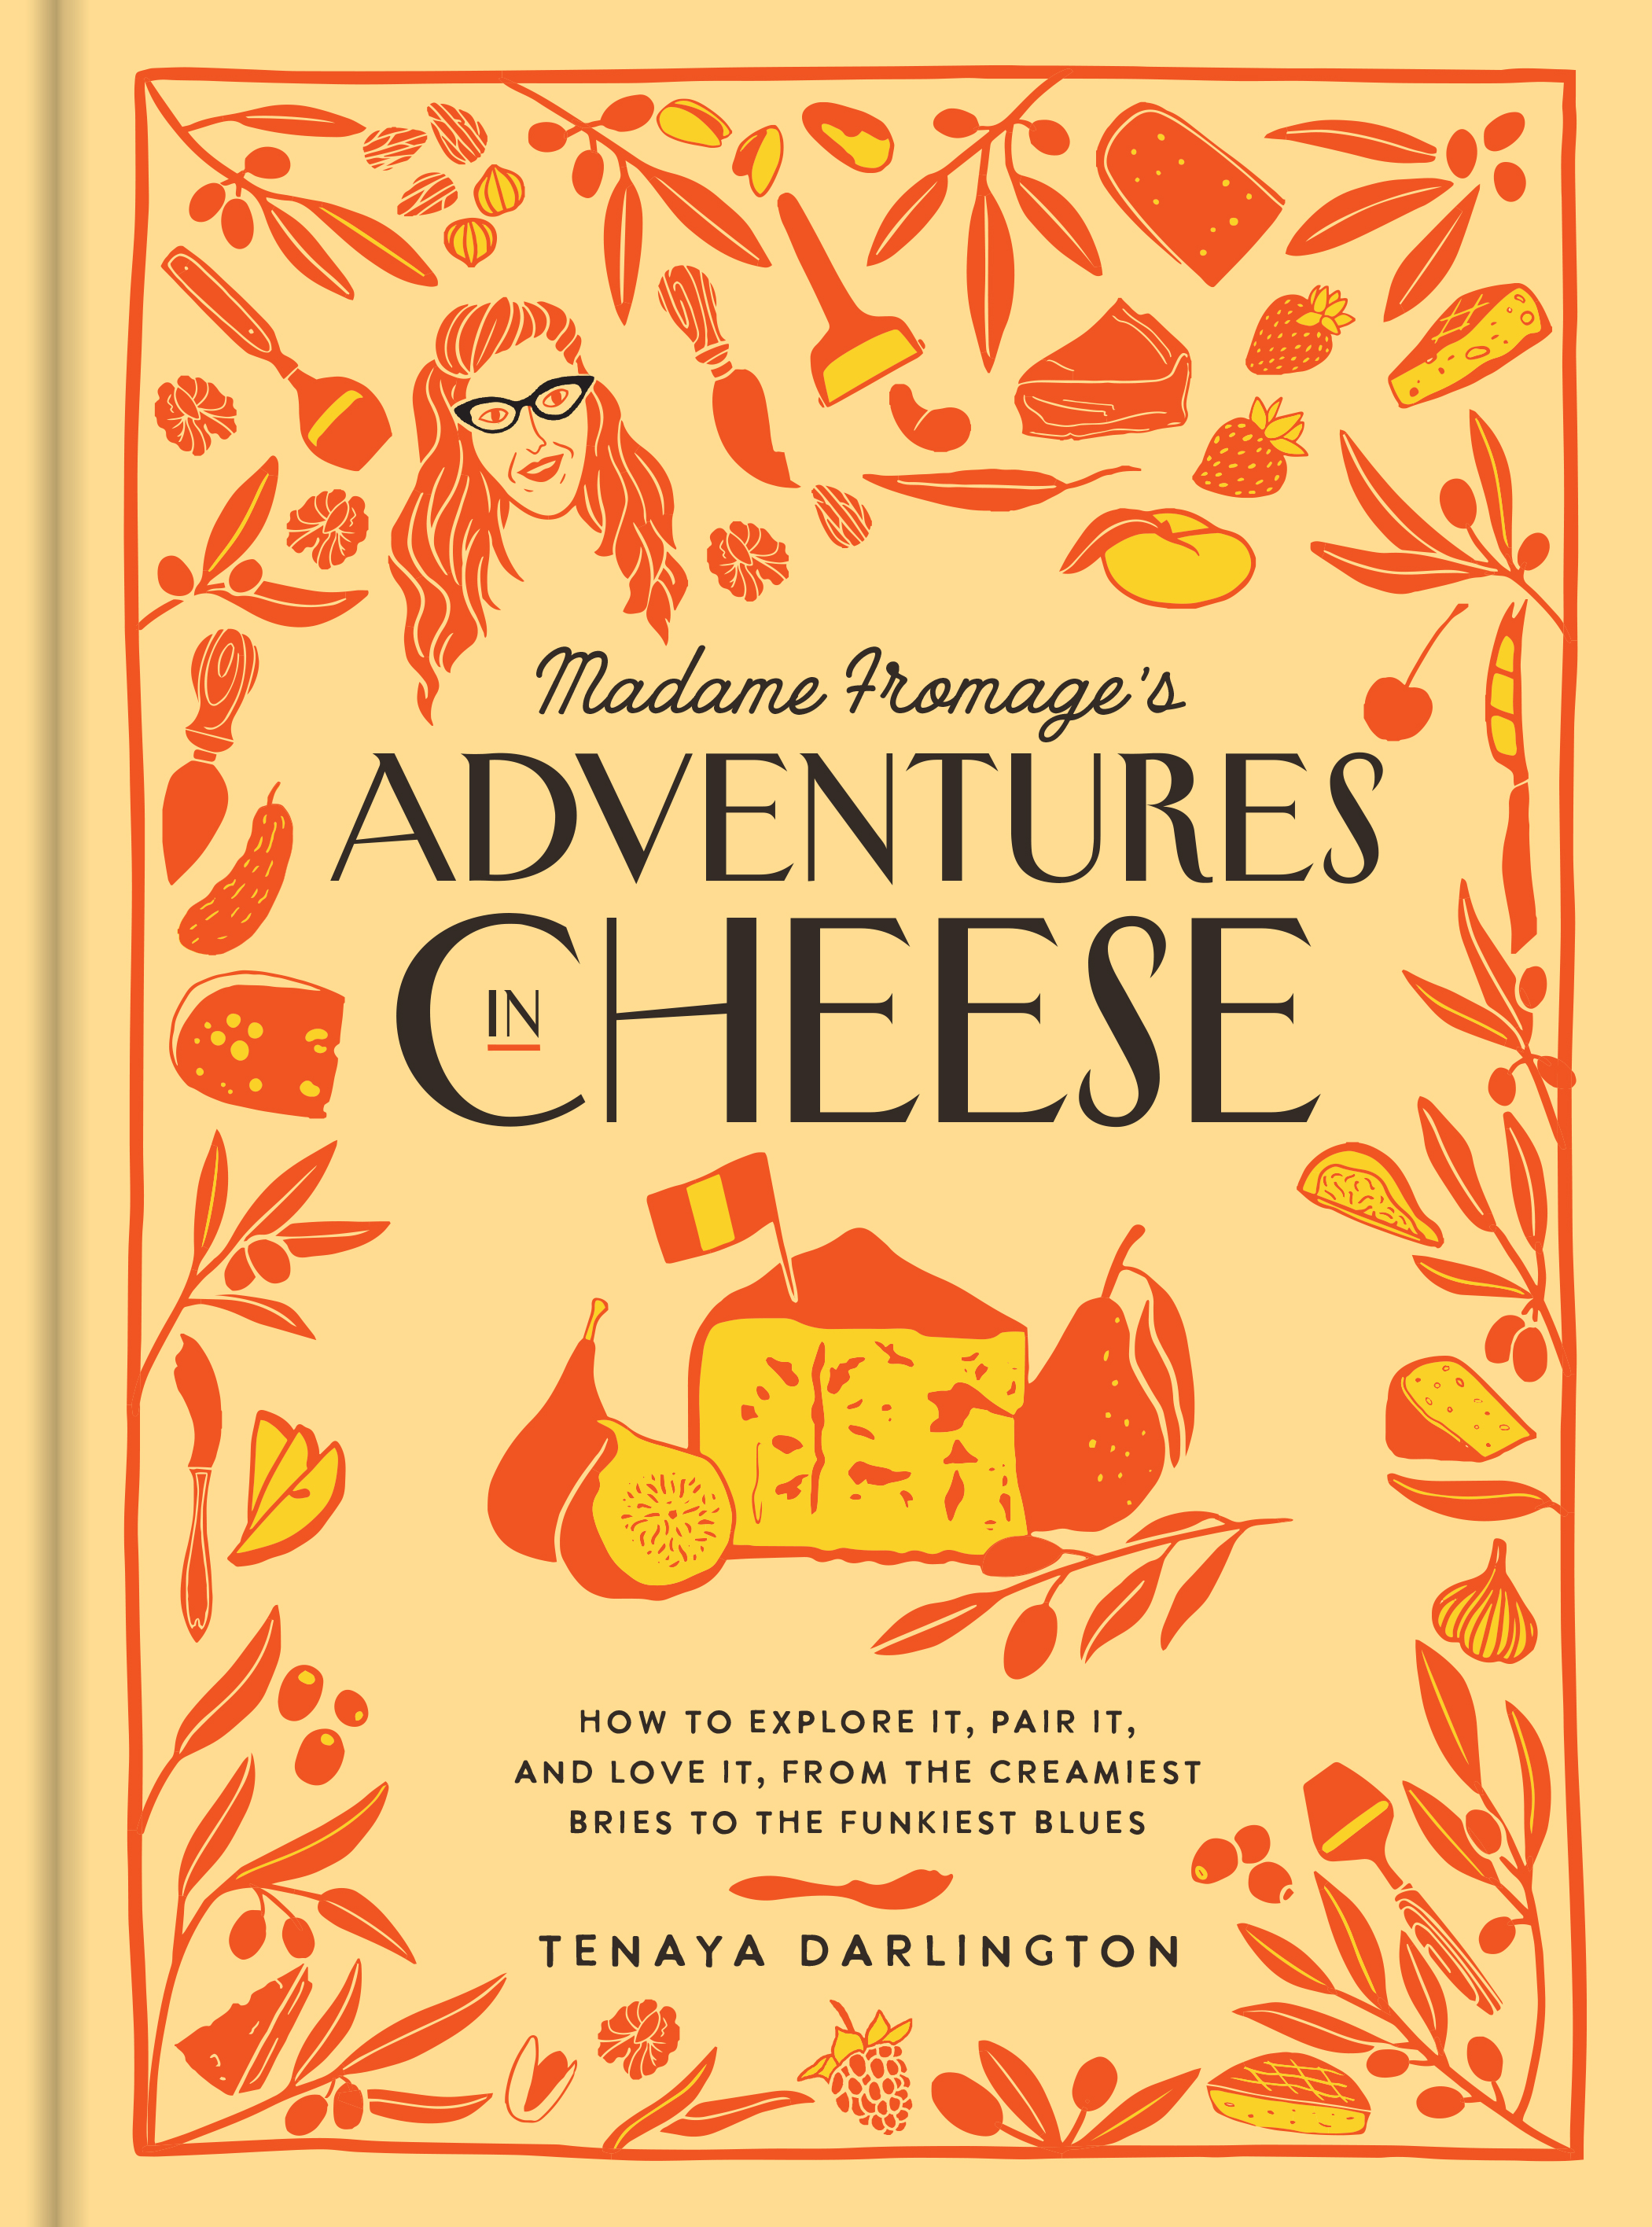 Madame Fromage's Adventures in Cheese by Tenaya Darlington